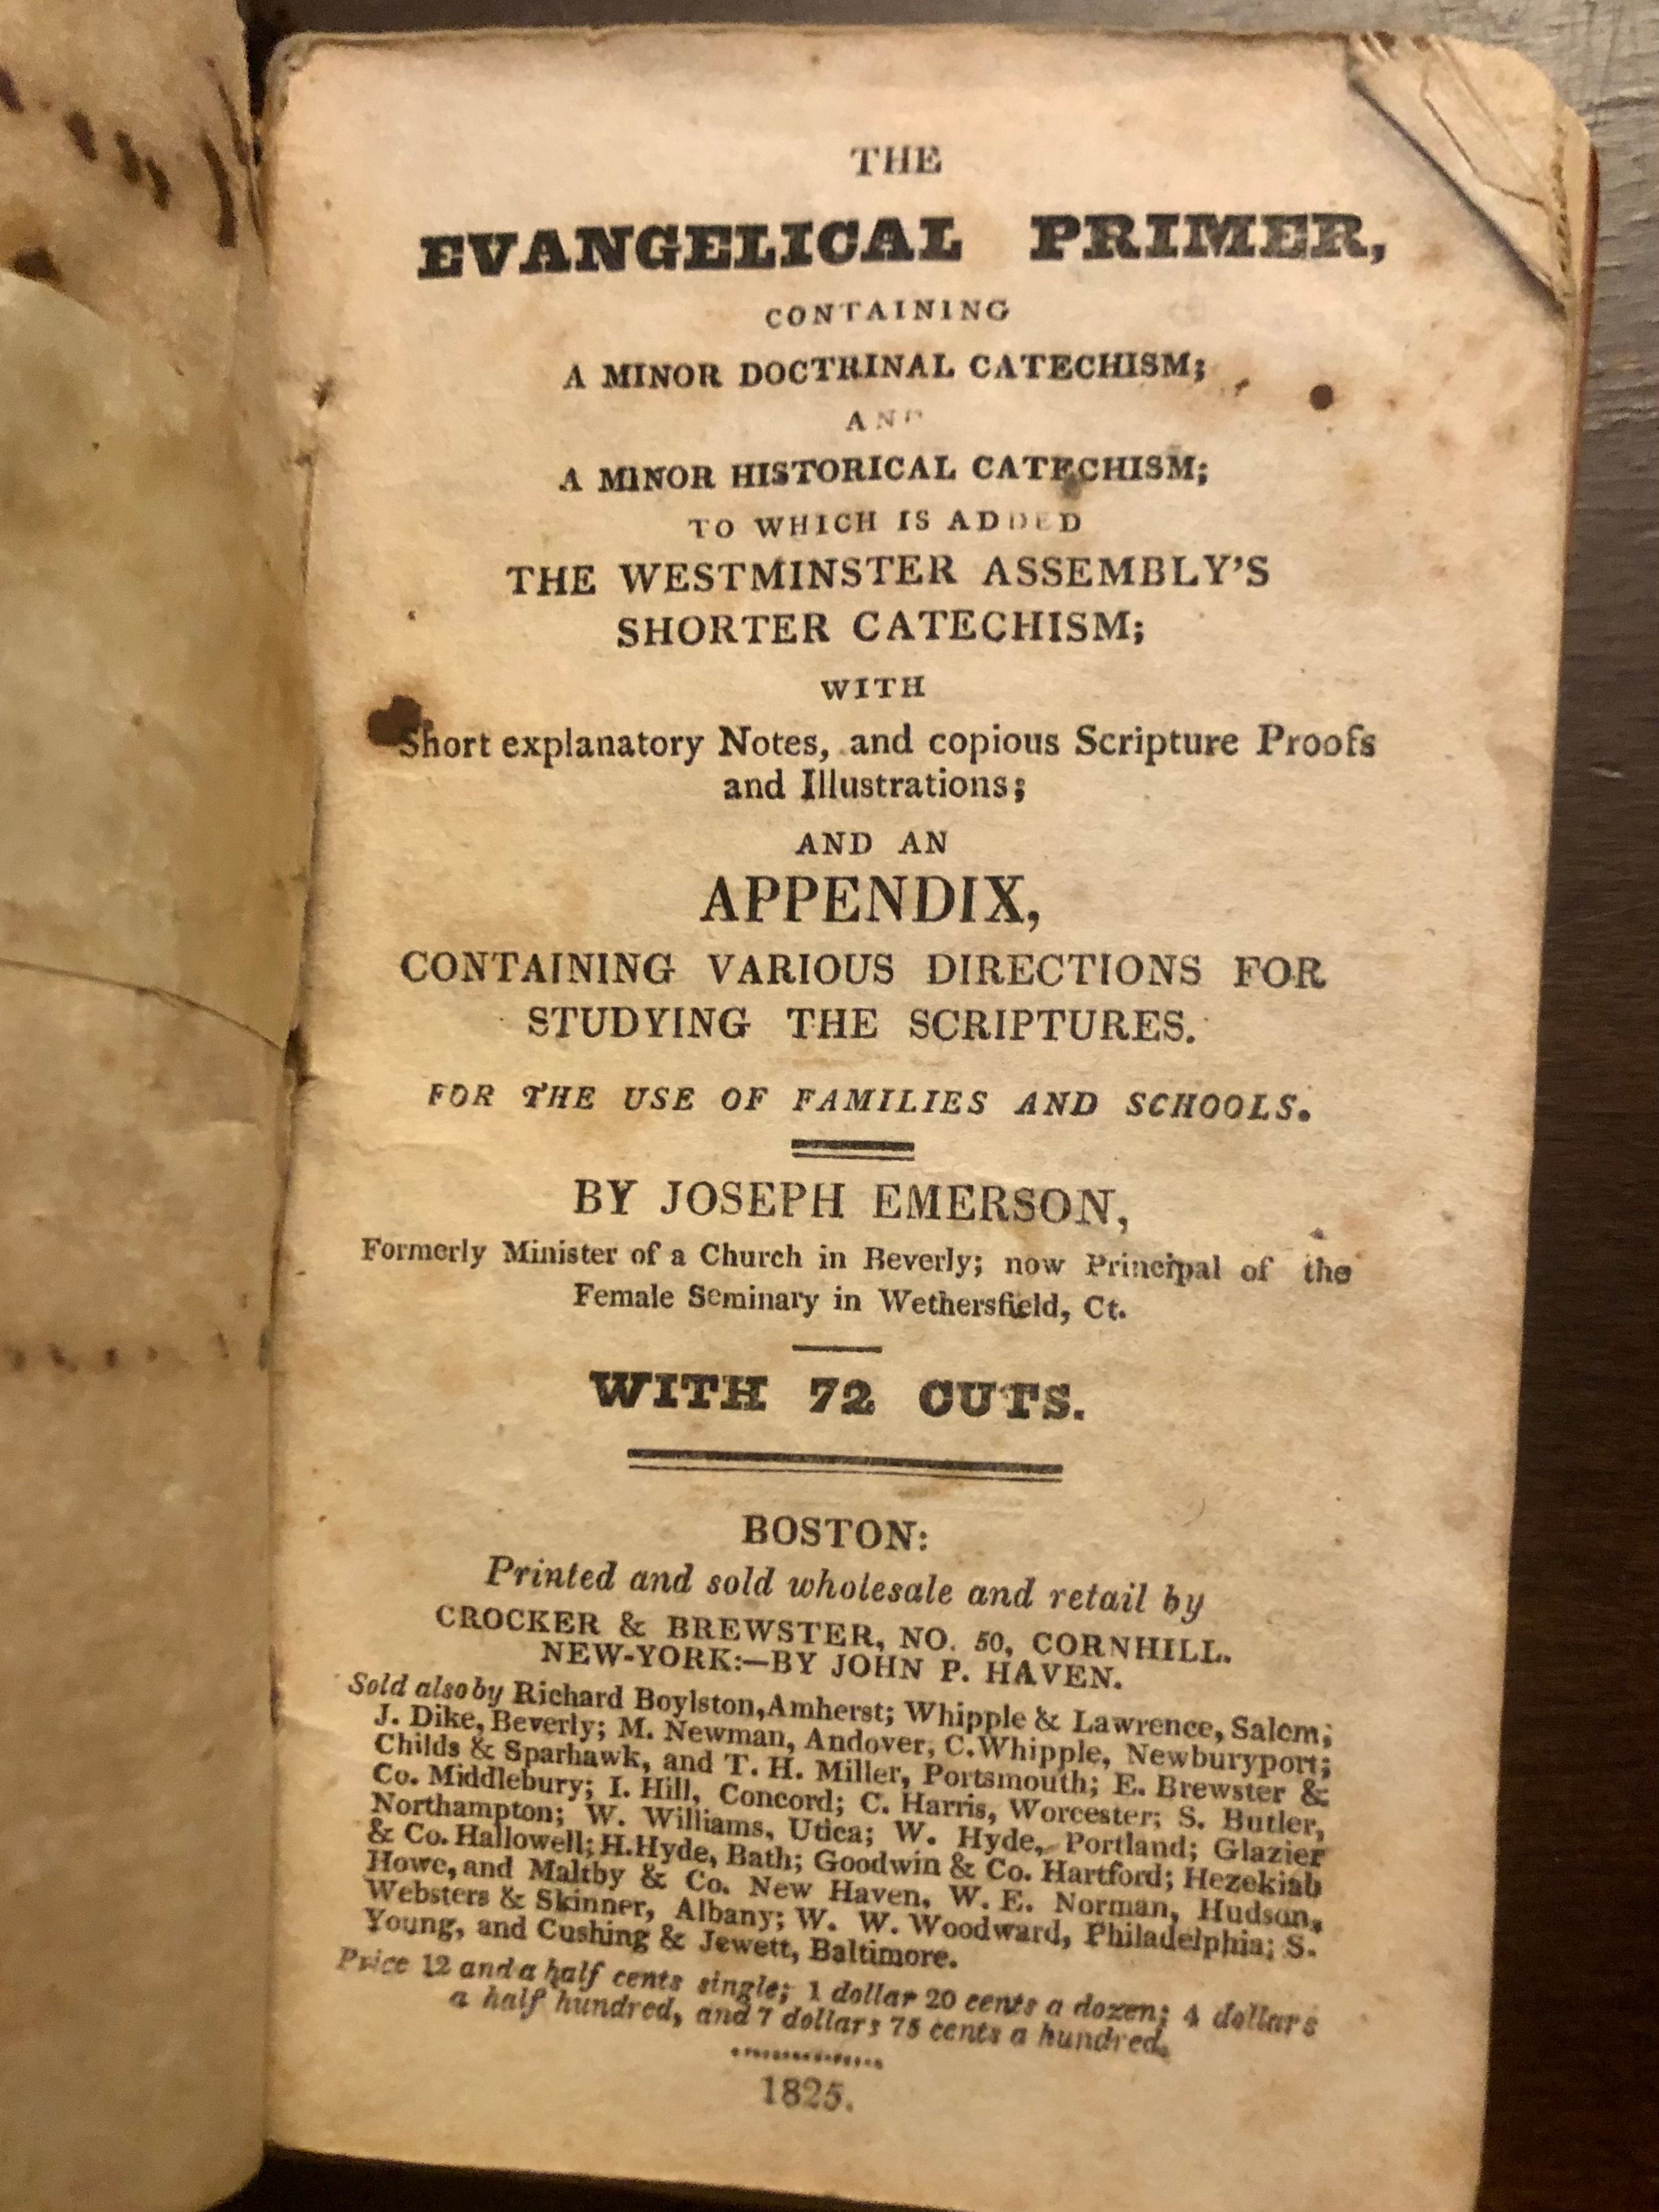 1826 Antiquarian Evangelical Primer with Provenance